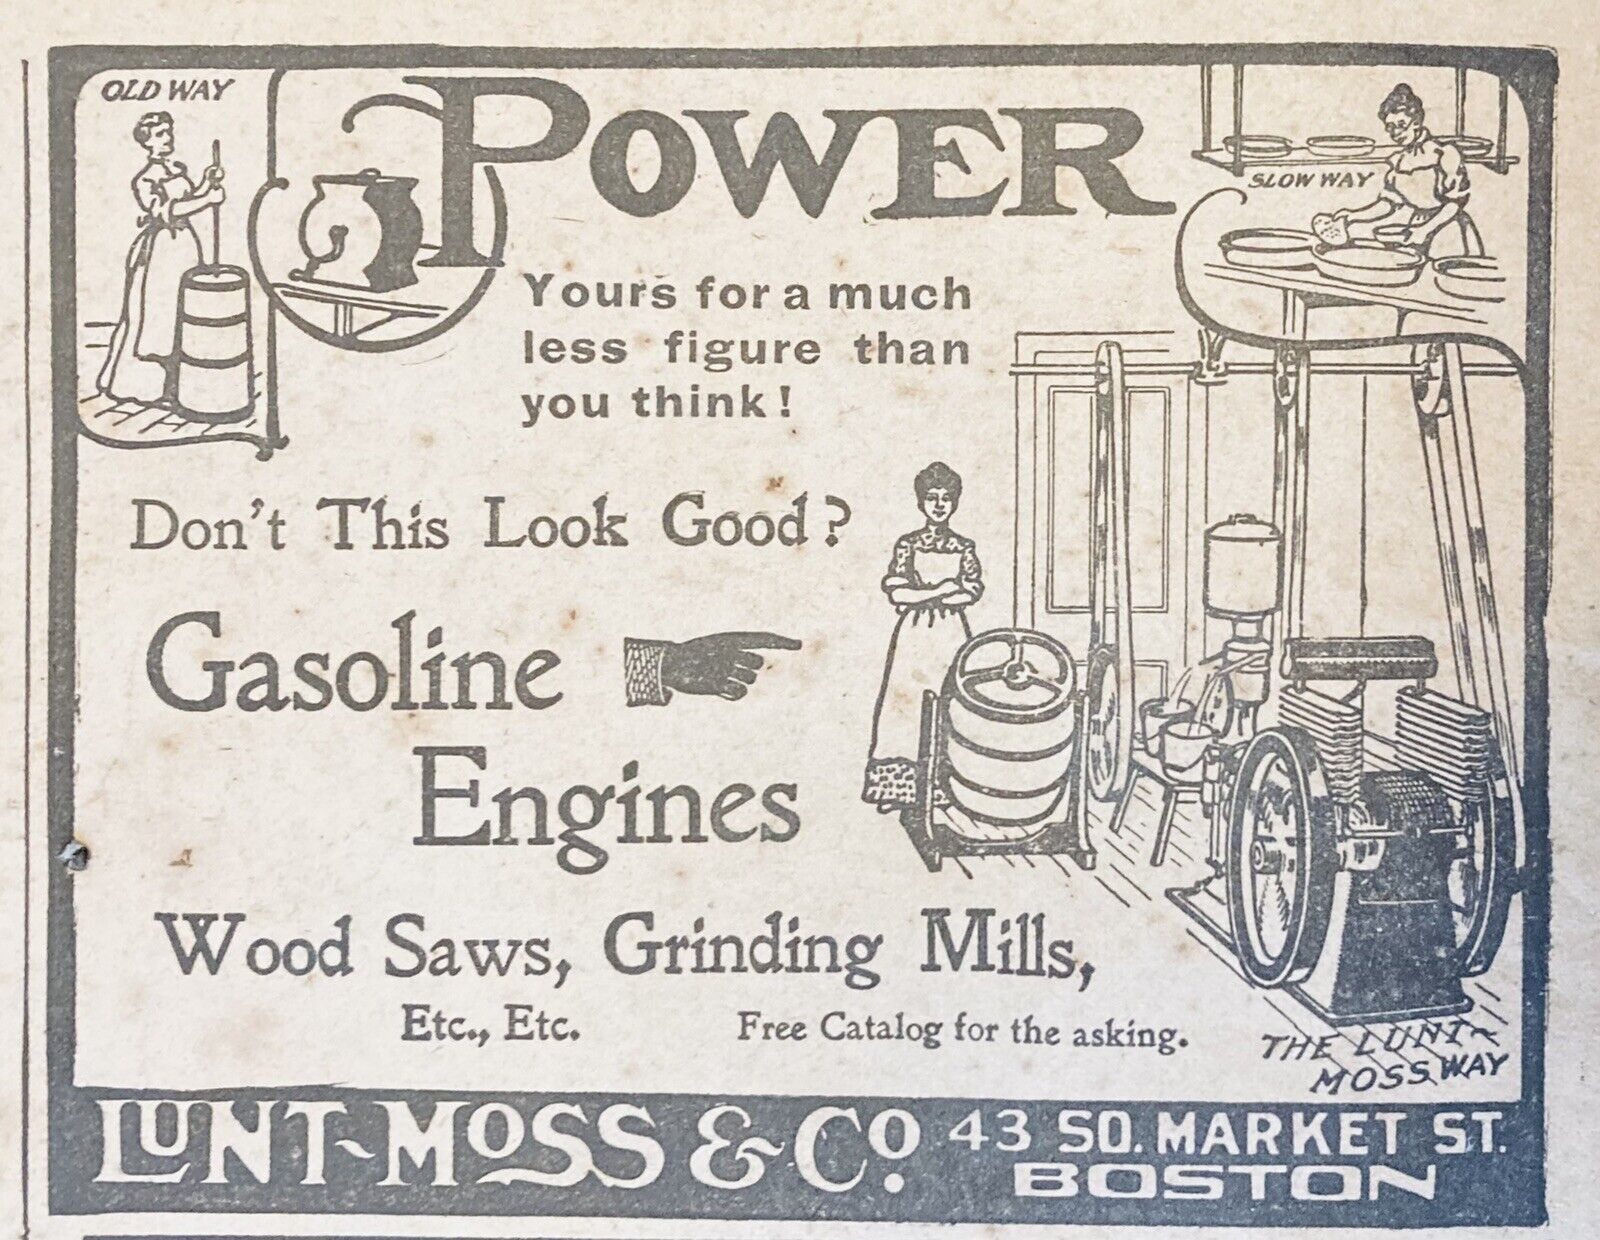 1905 AD(XH35)~LUNT, MOSS CO. BOSTON. WOOD SAWS, GRINDING MILL GASOLINE ENGINES